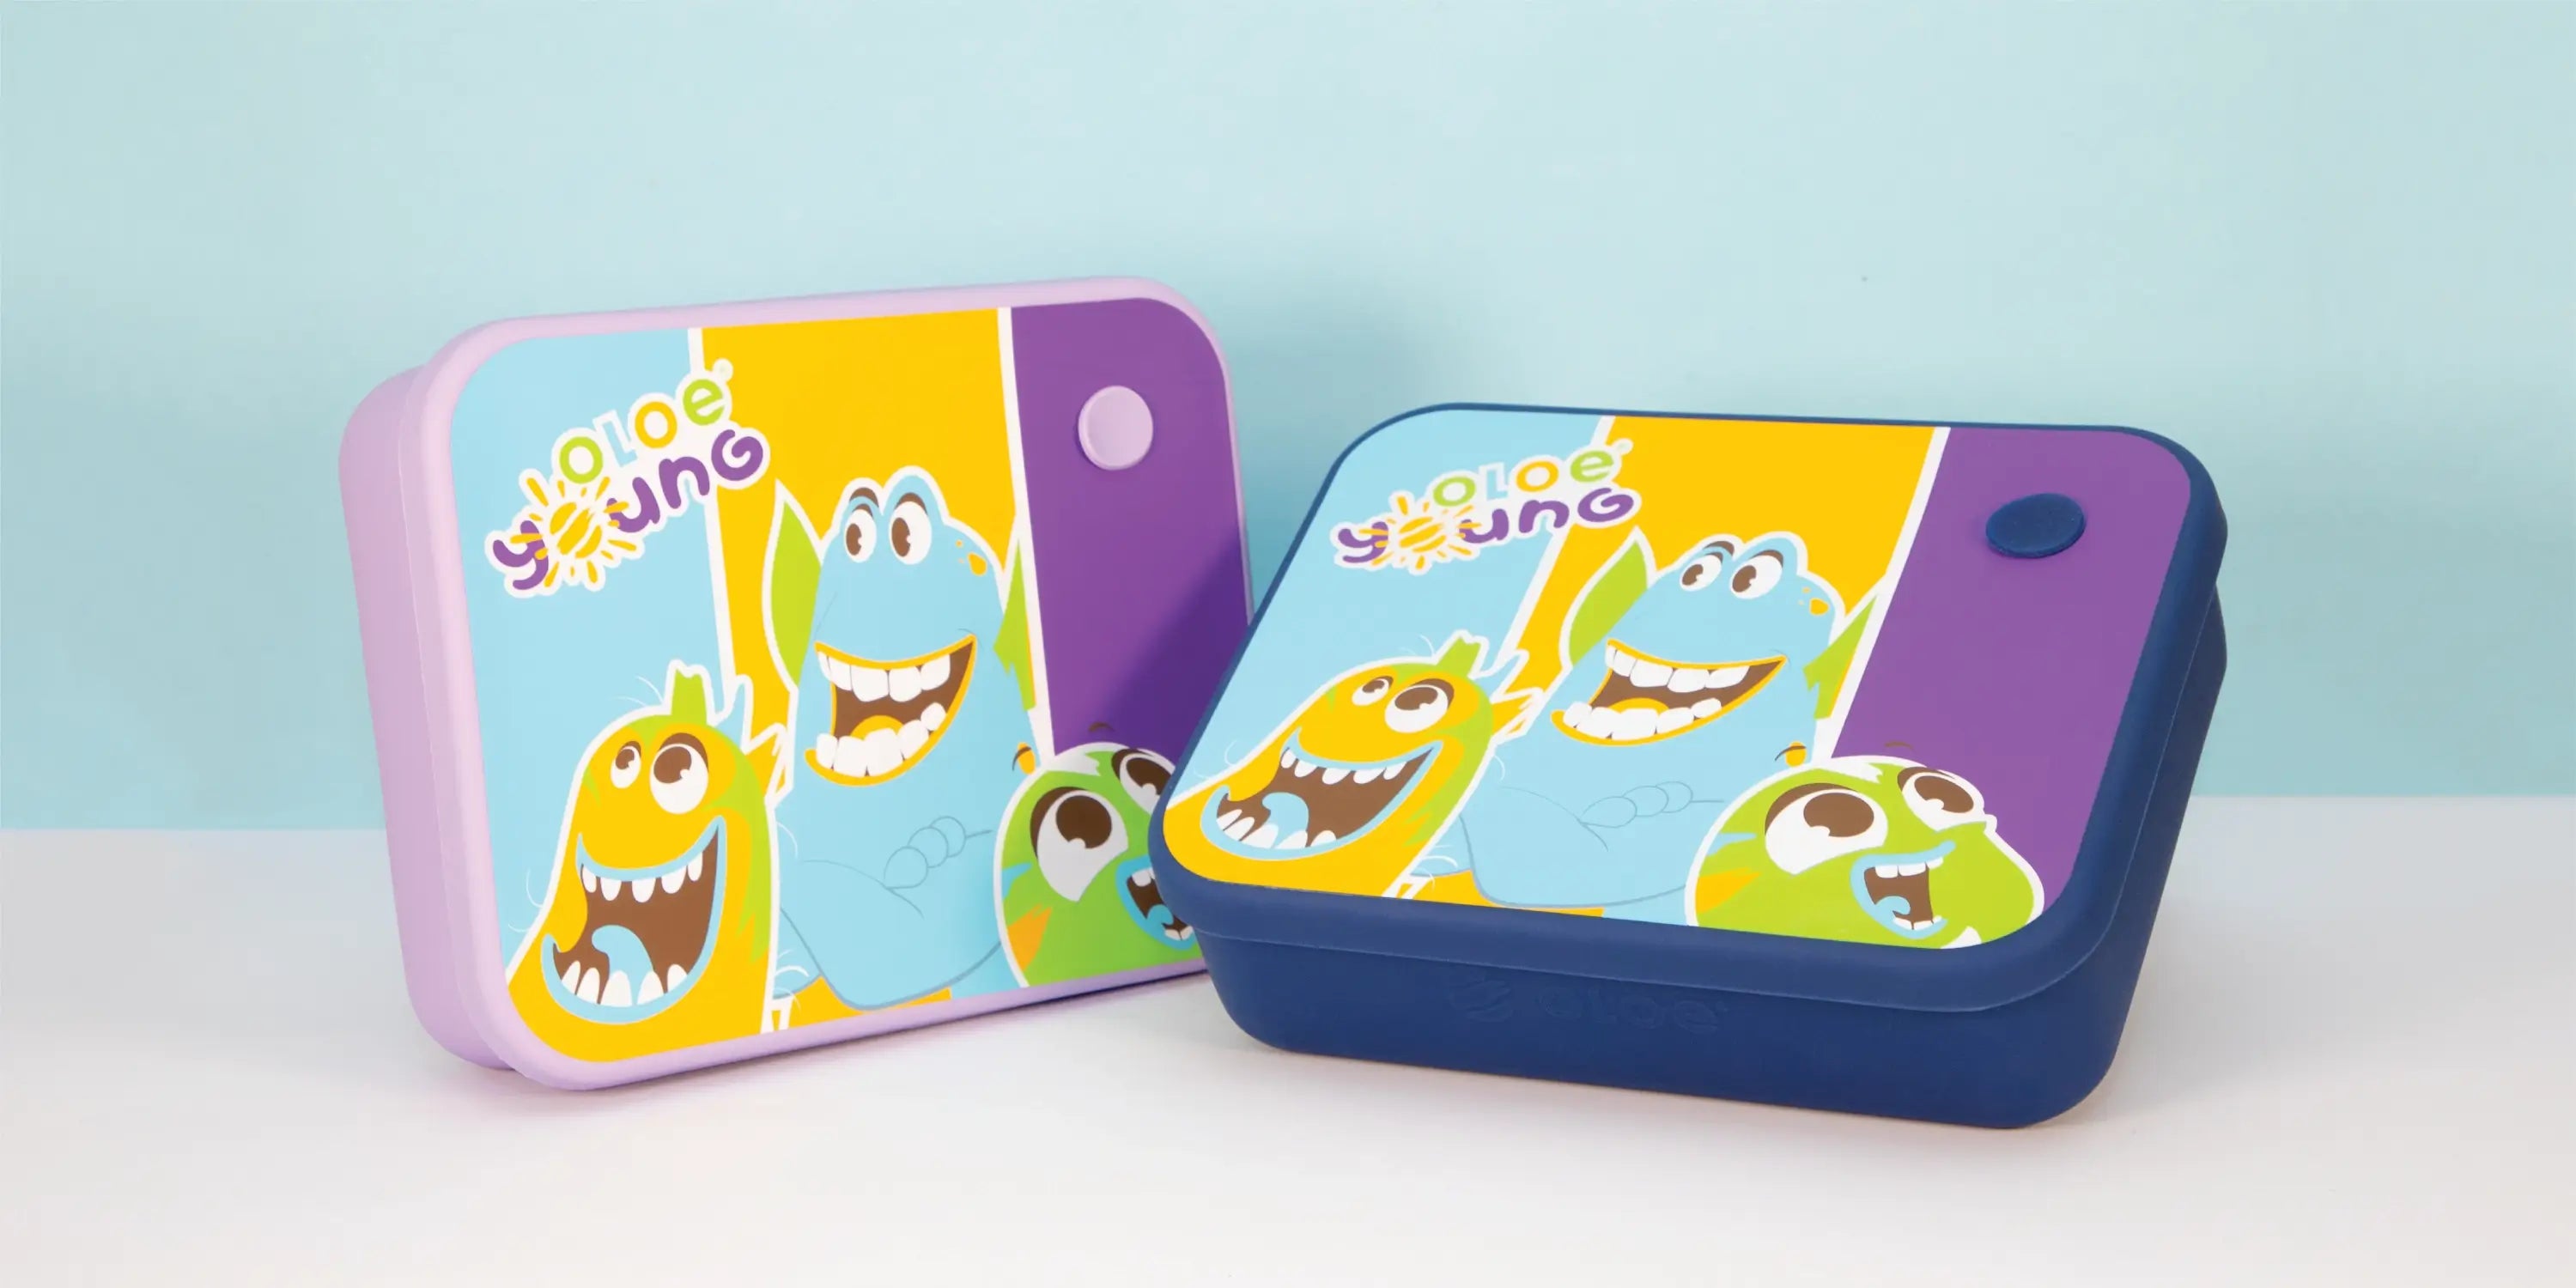 oloe-character-silicone-bento-box-2-colours-purple-and-navy-front-facing